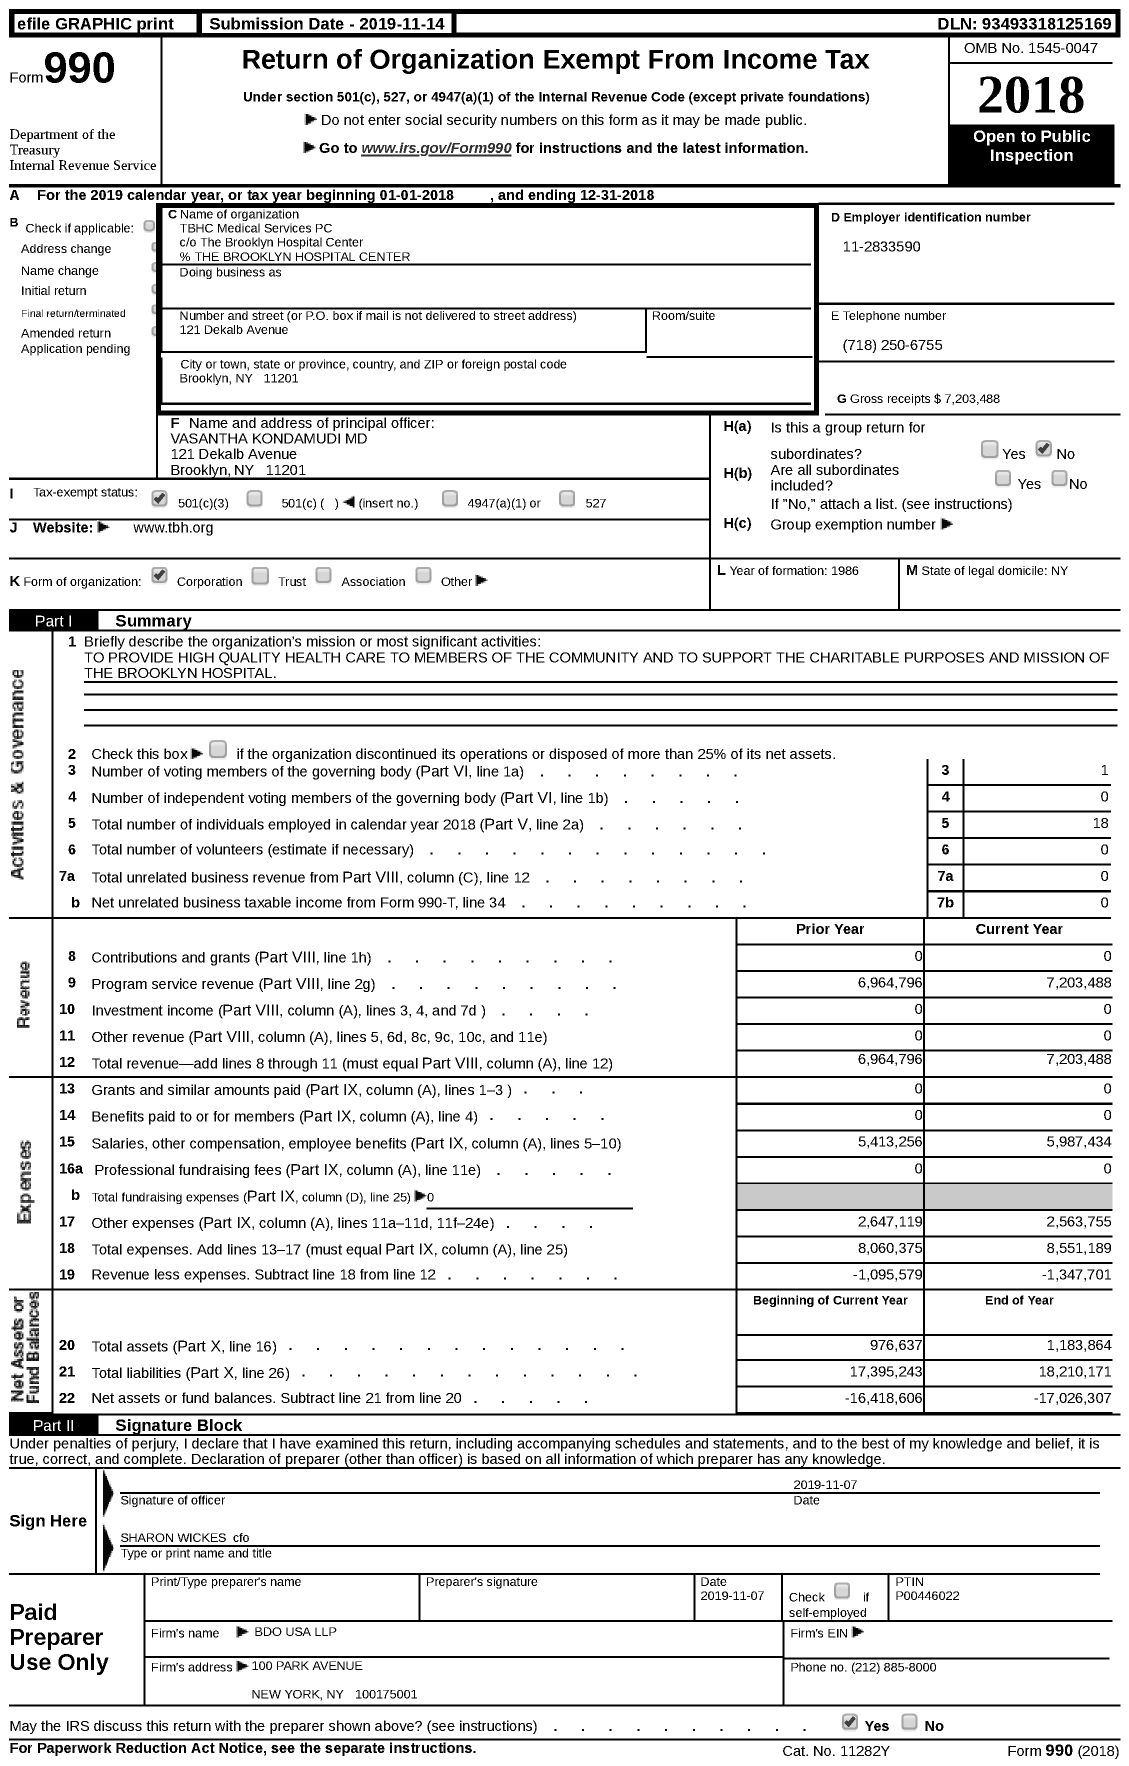 Image of first page of 2018 Form 990 for TBHC Medical Services PC